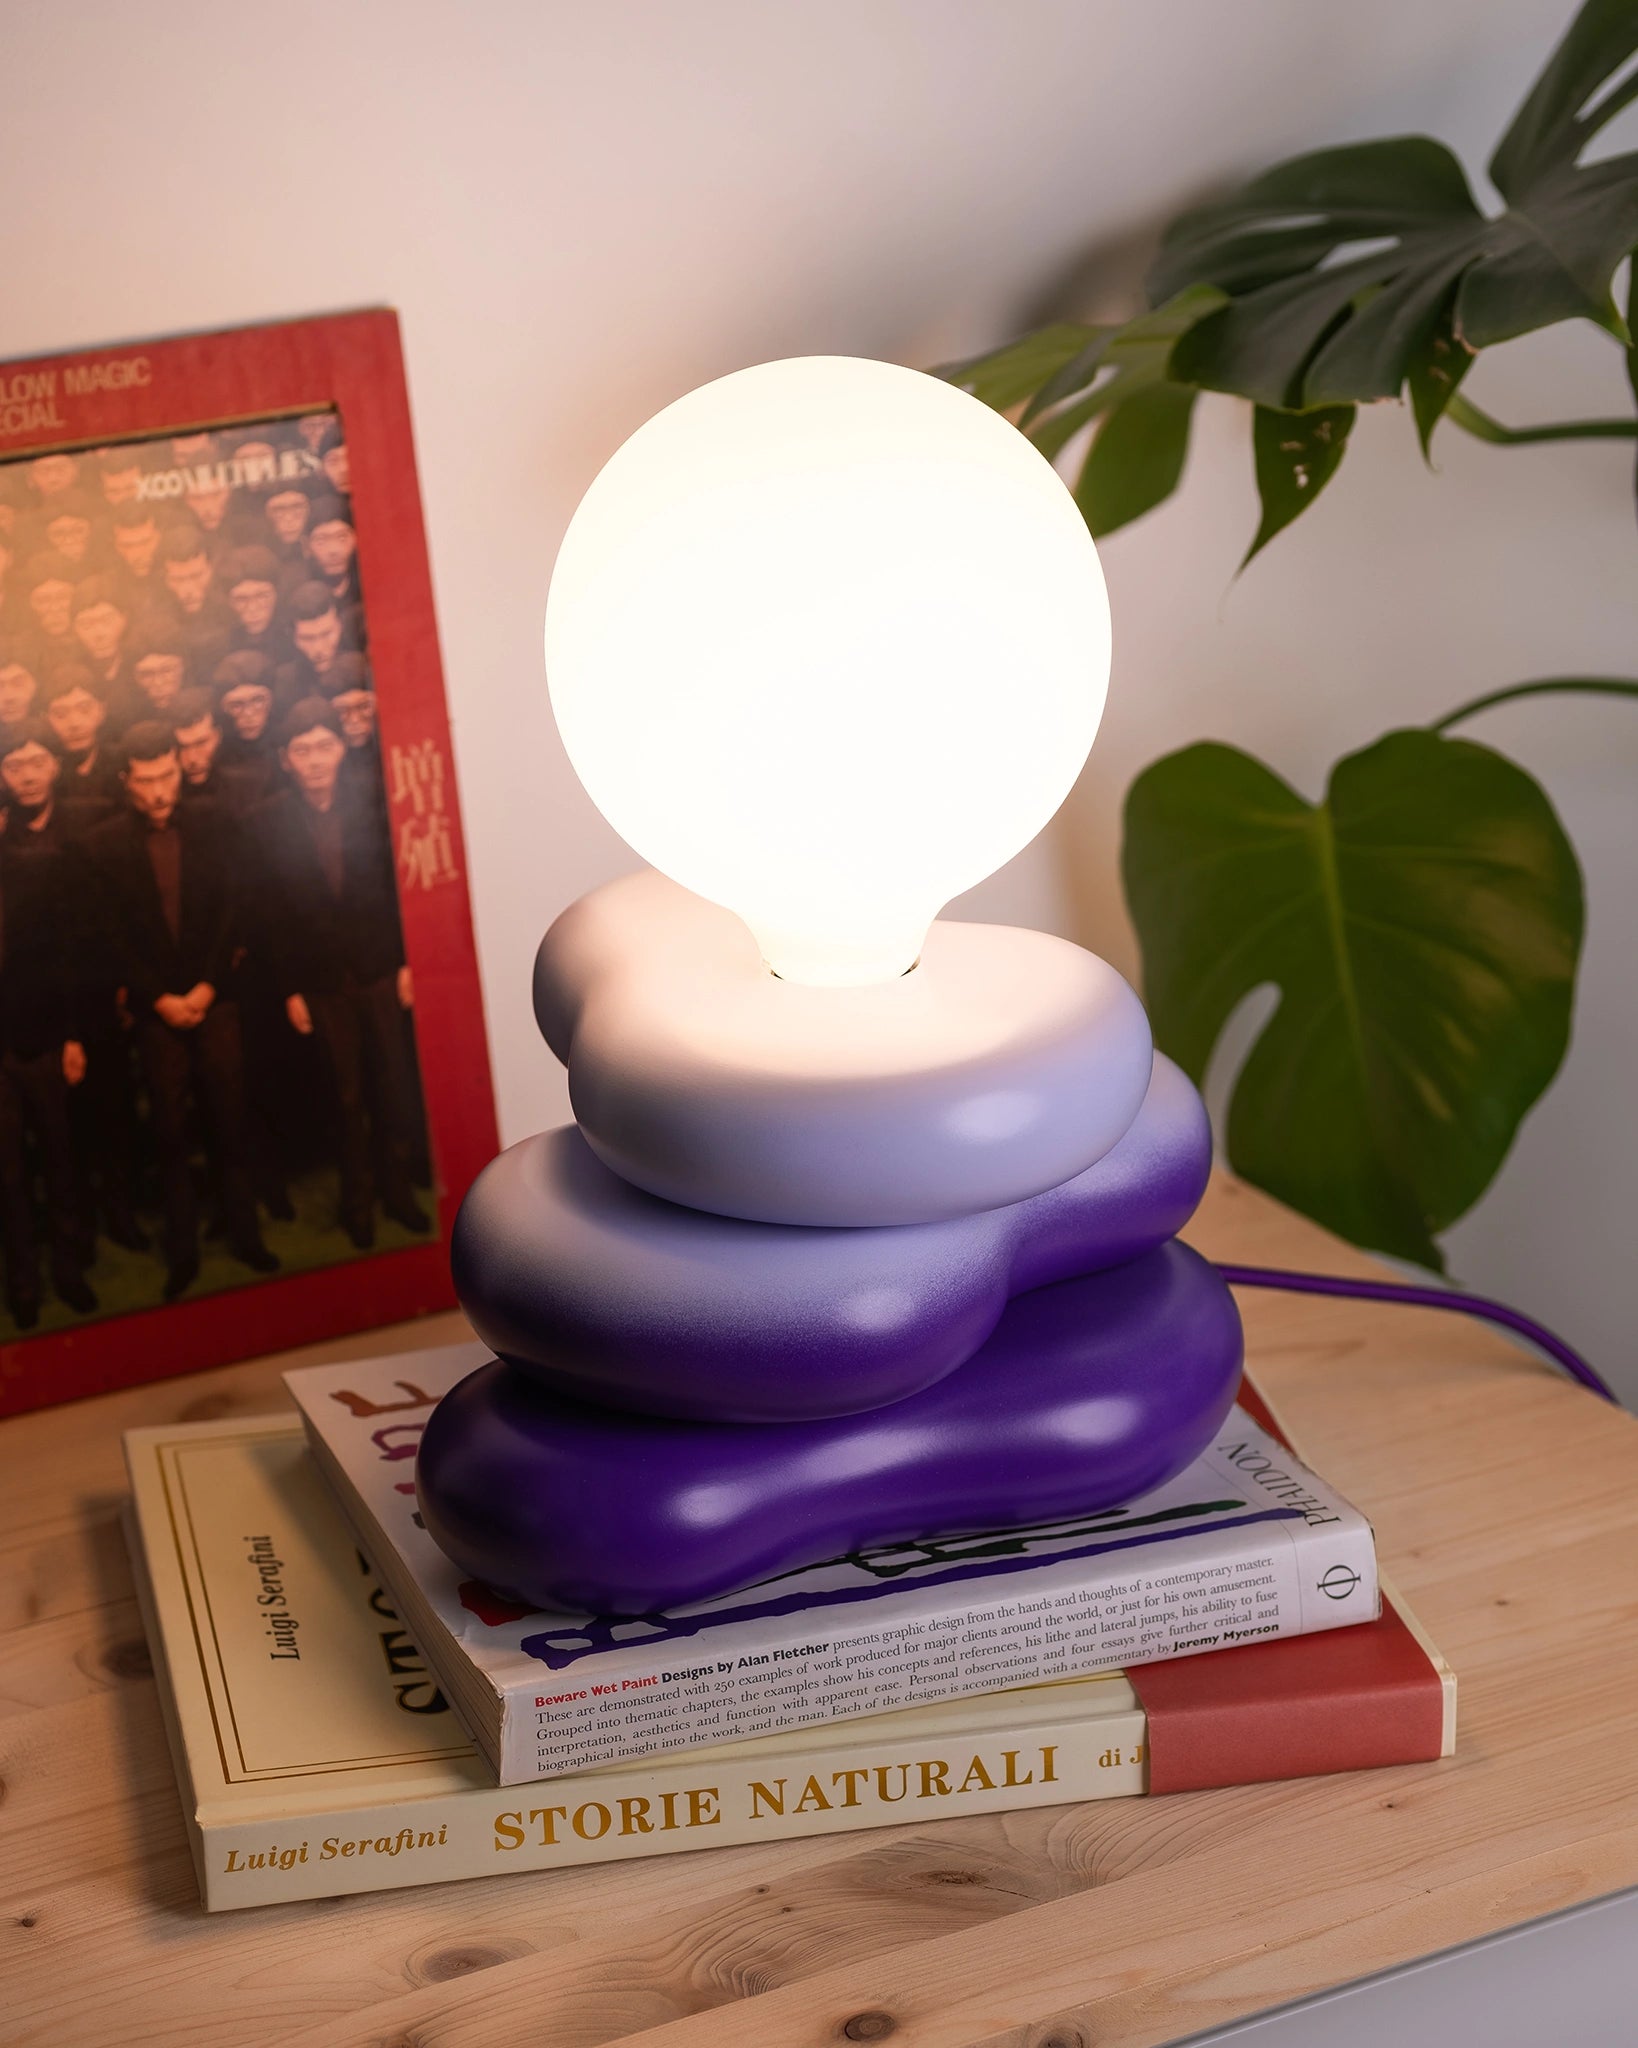 desk lamp in a home setting with round bulb and soft shaped wooden base, purple gradient 